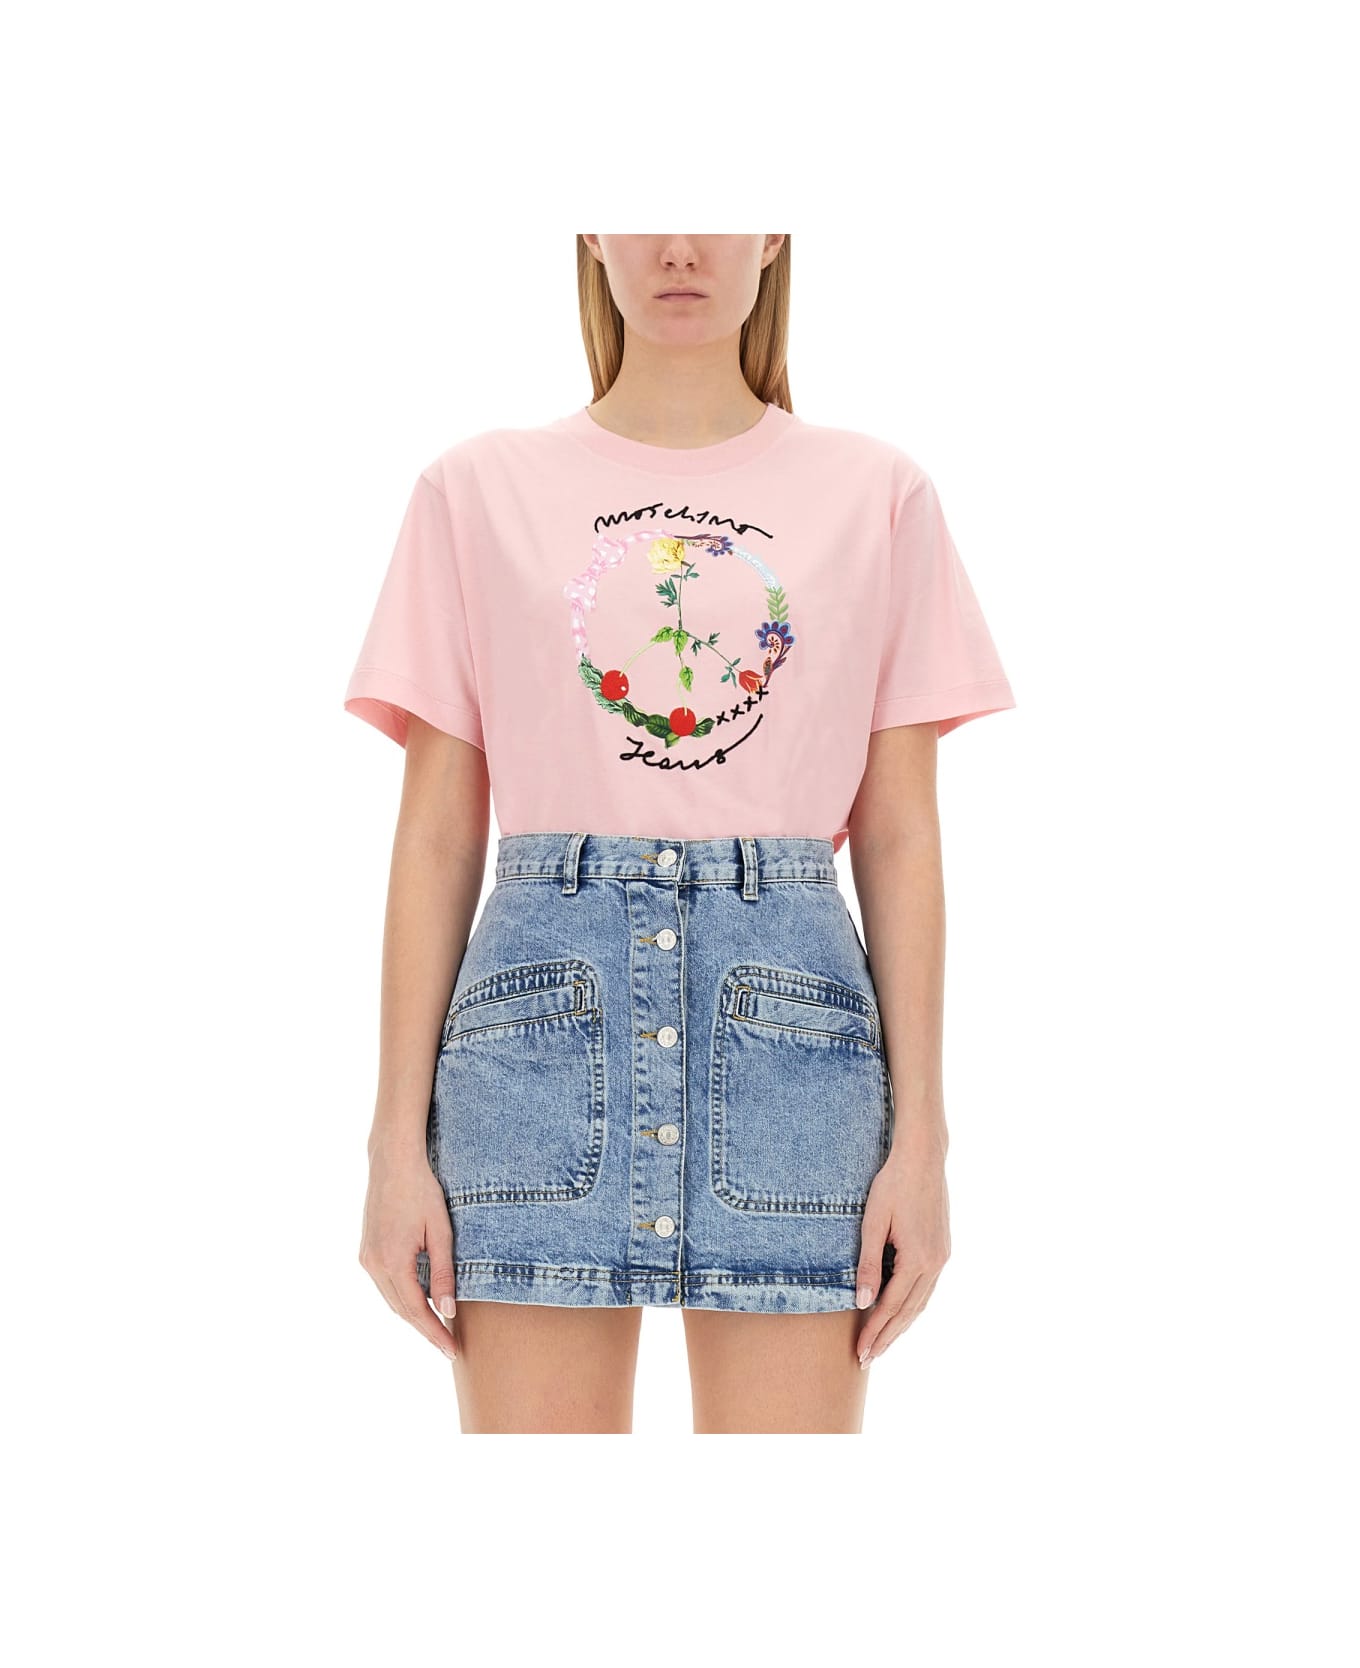 M05CH1N0 Jeans T-shirt With Logo - PINK